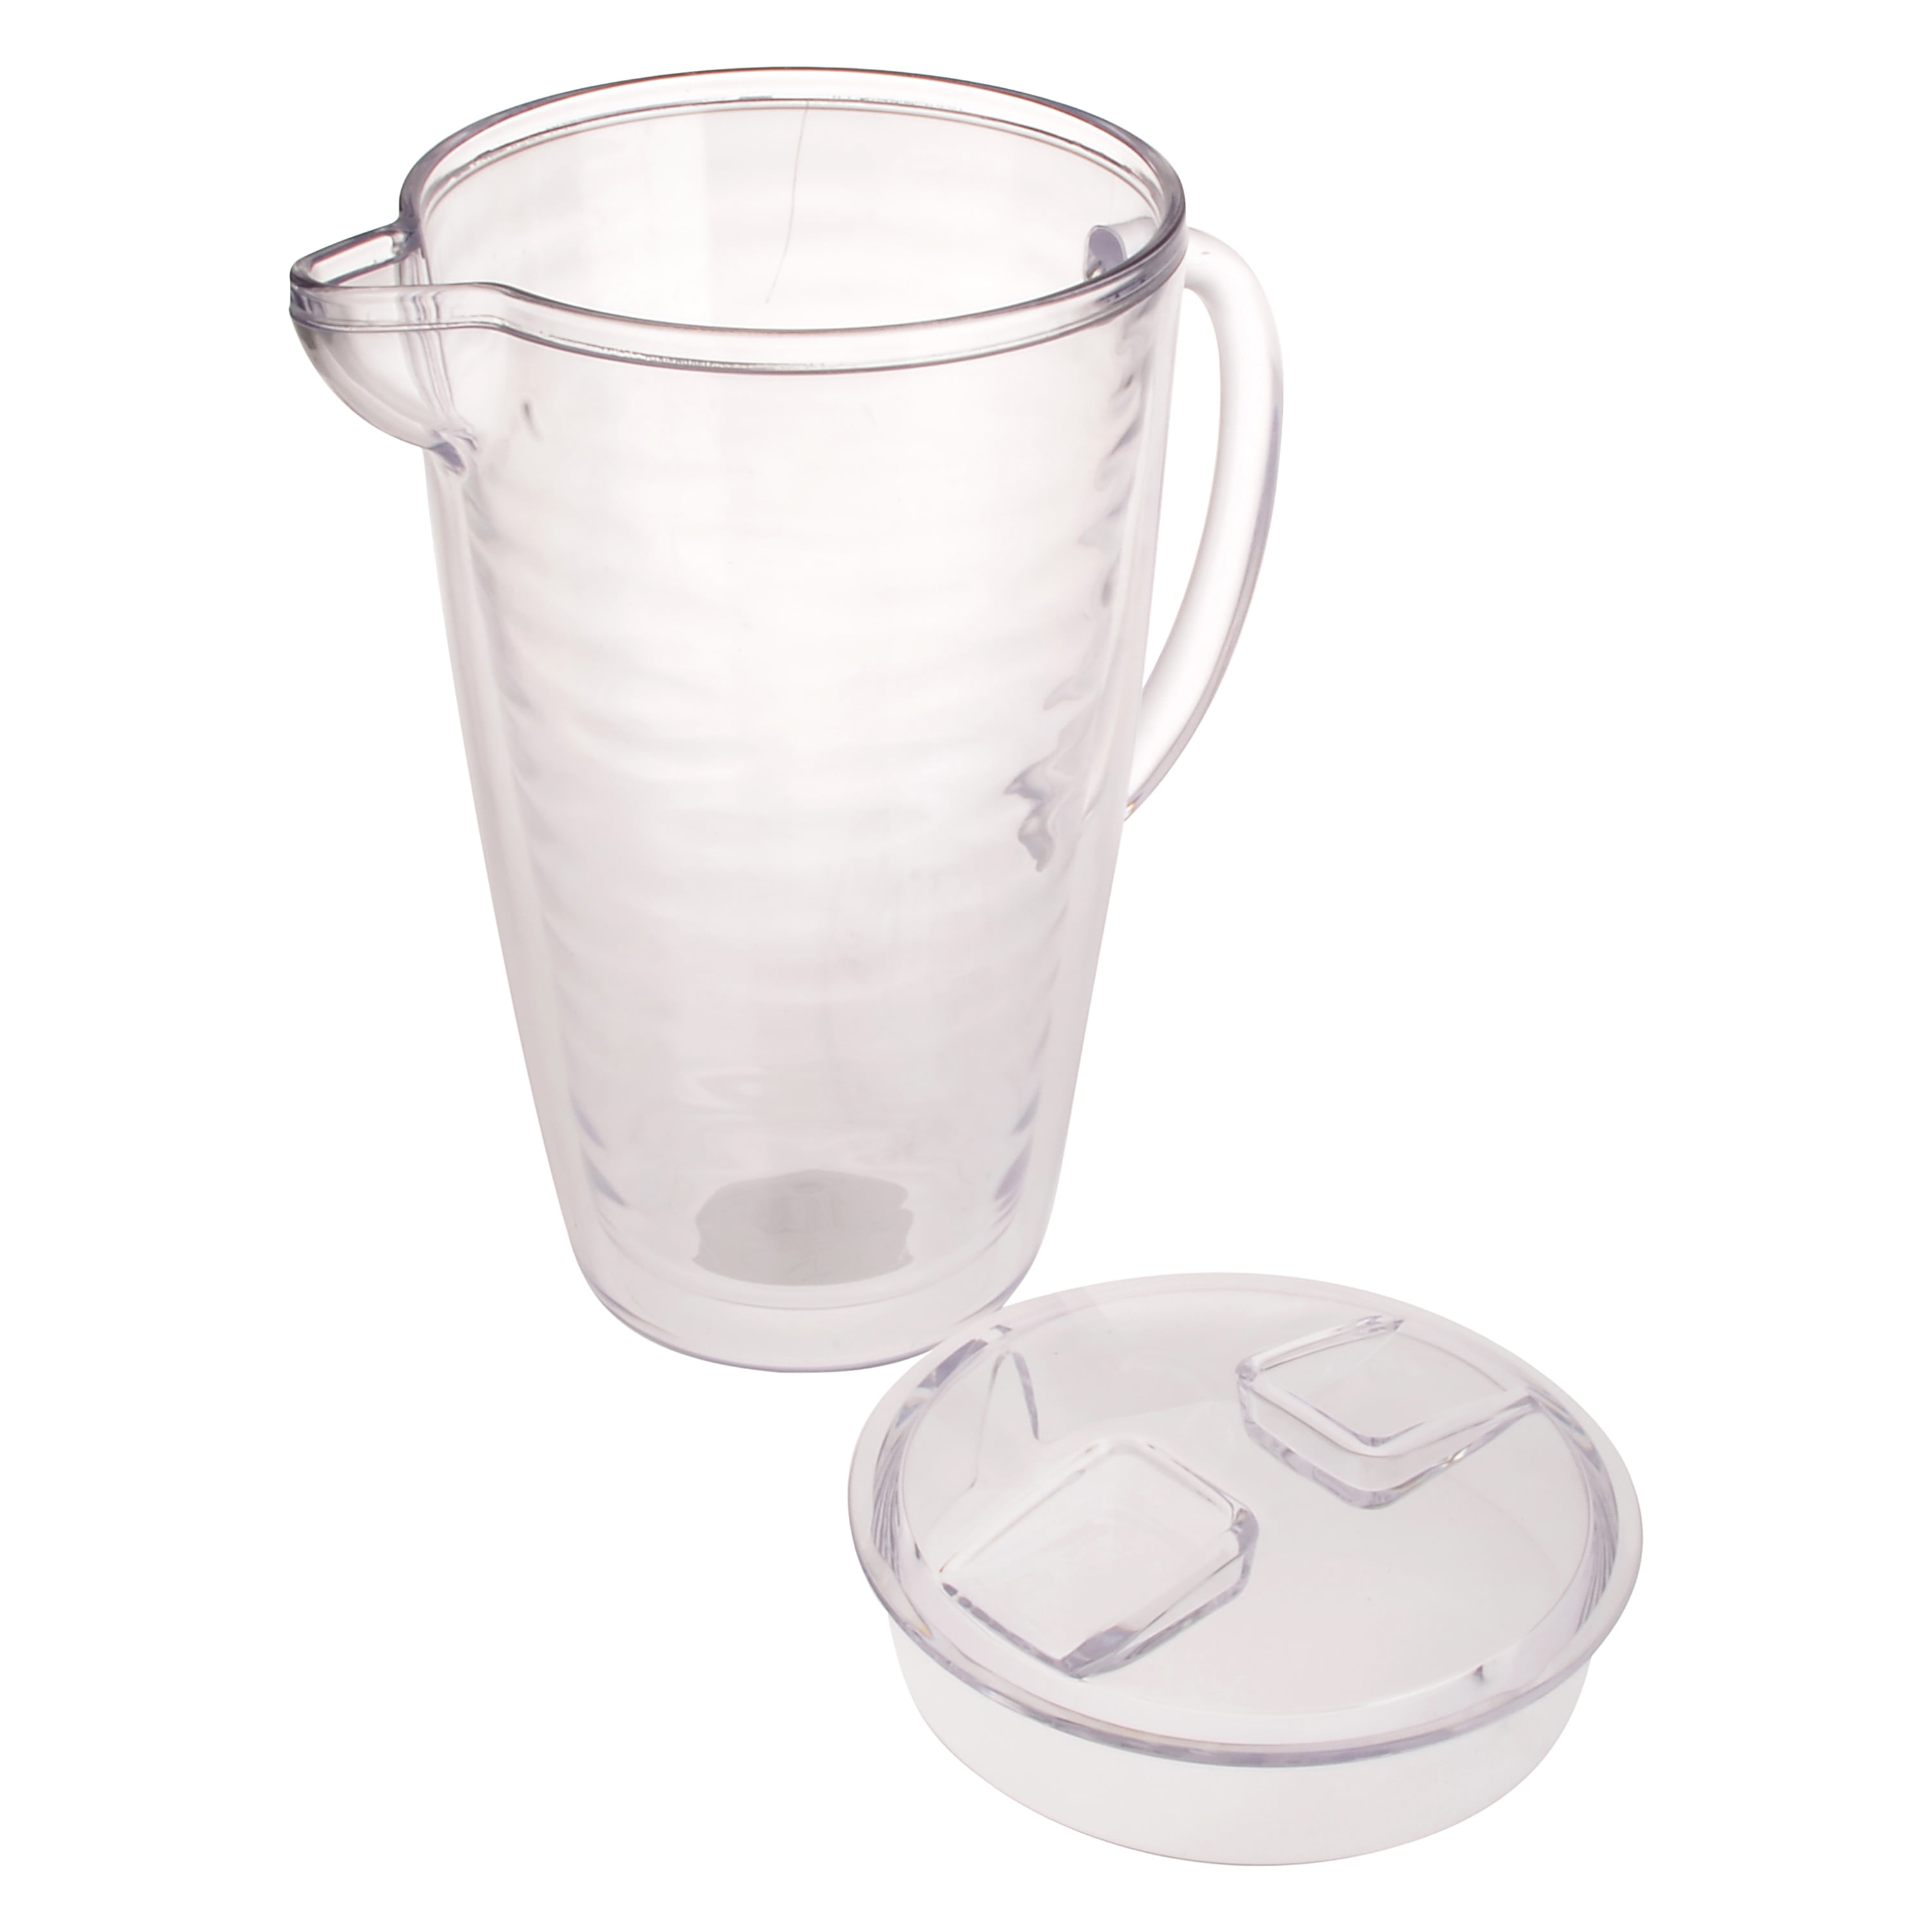 Youngever 2.2 Quarts Plastic Pitcher With Lid - Clear